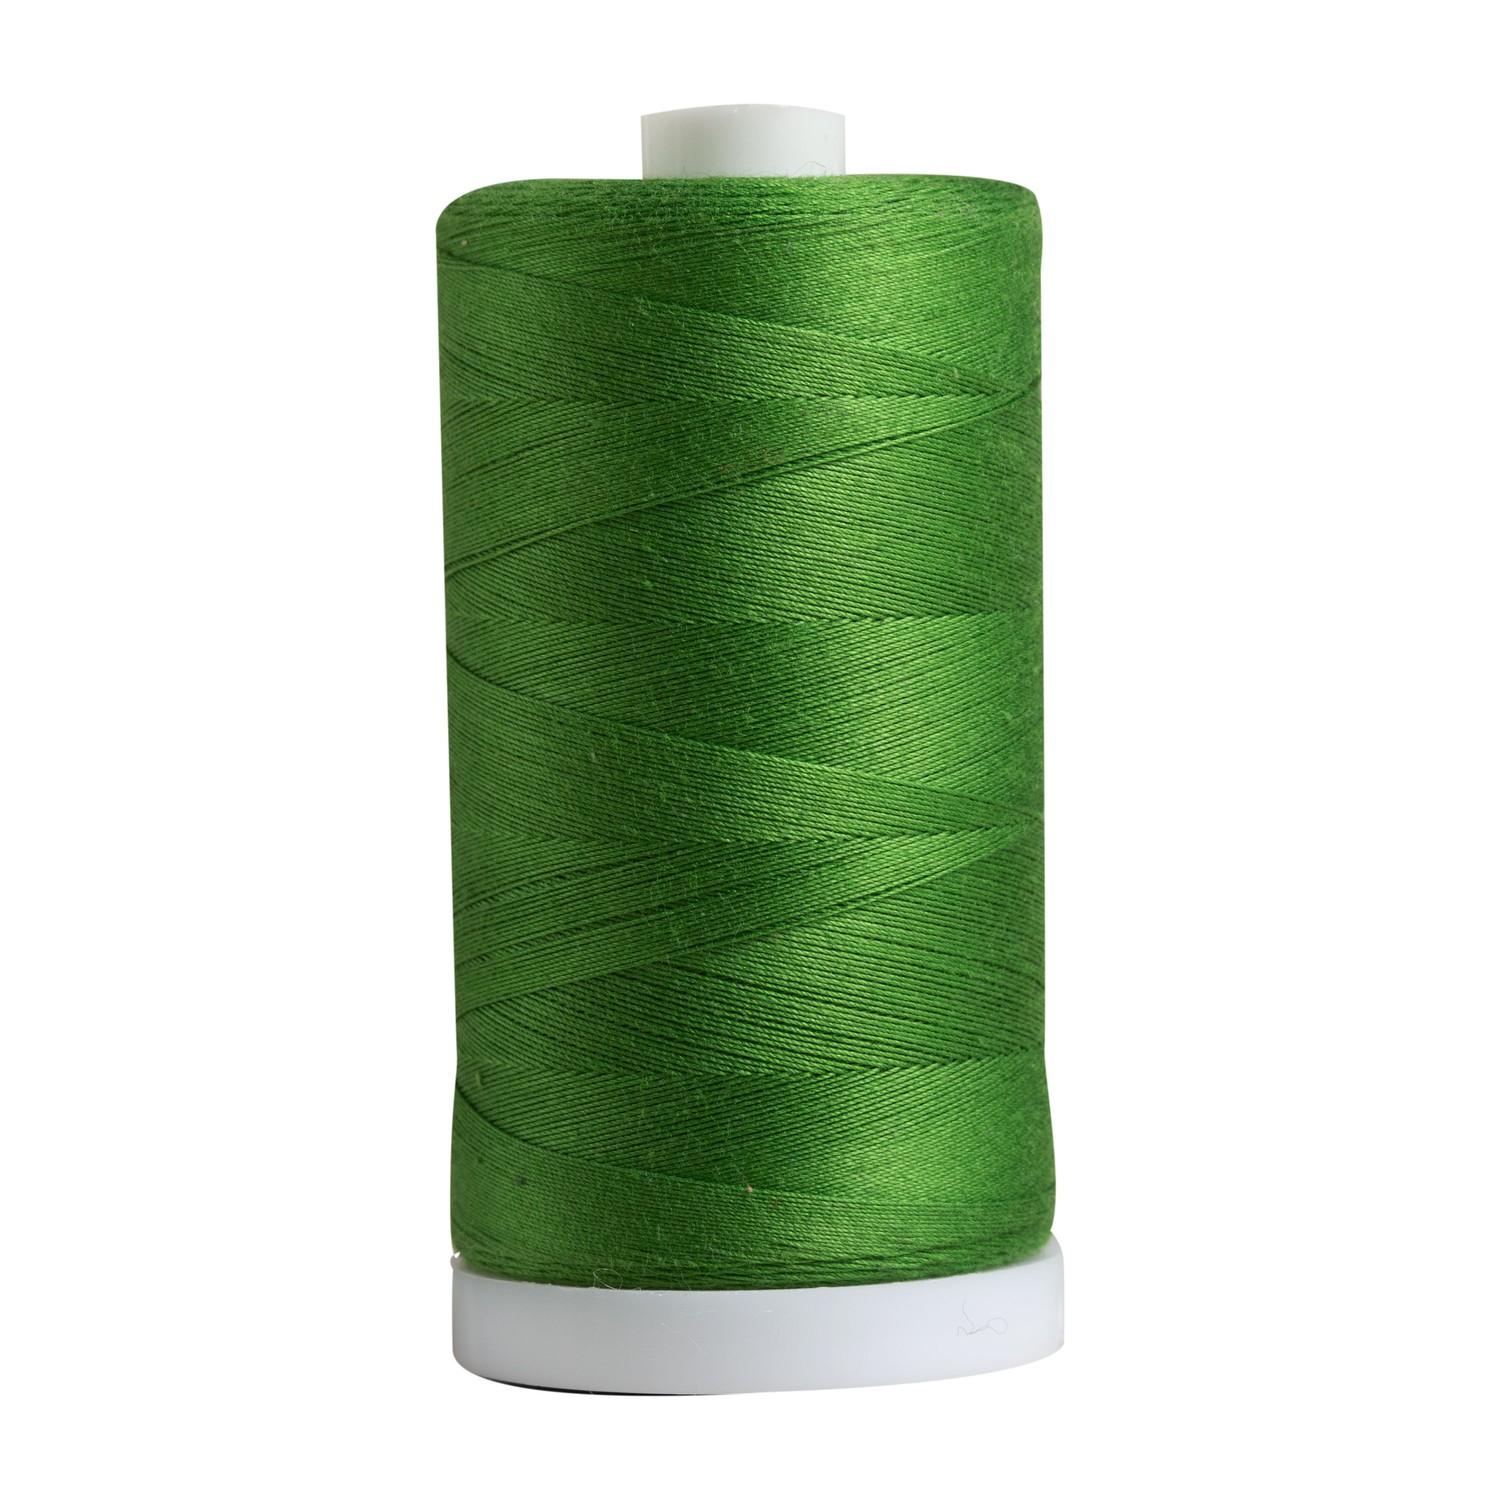 Favorite thread for hand sewing binding – Ivory Spring